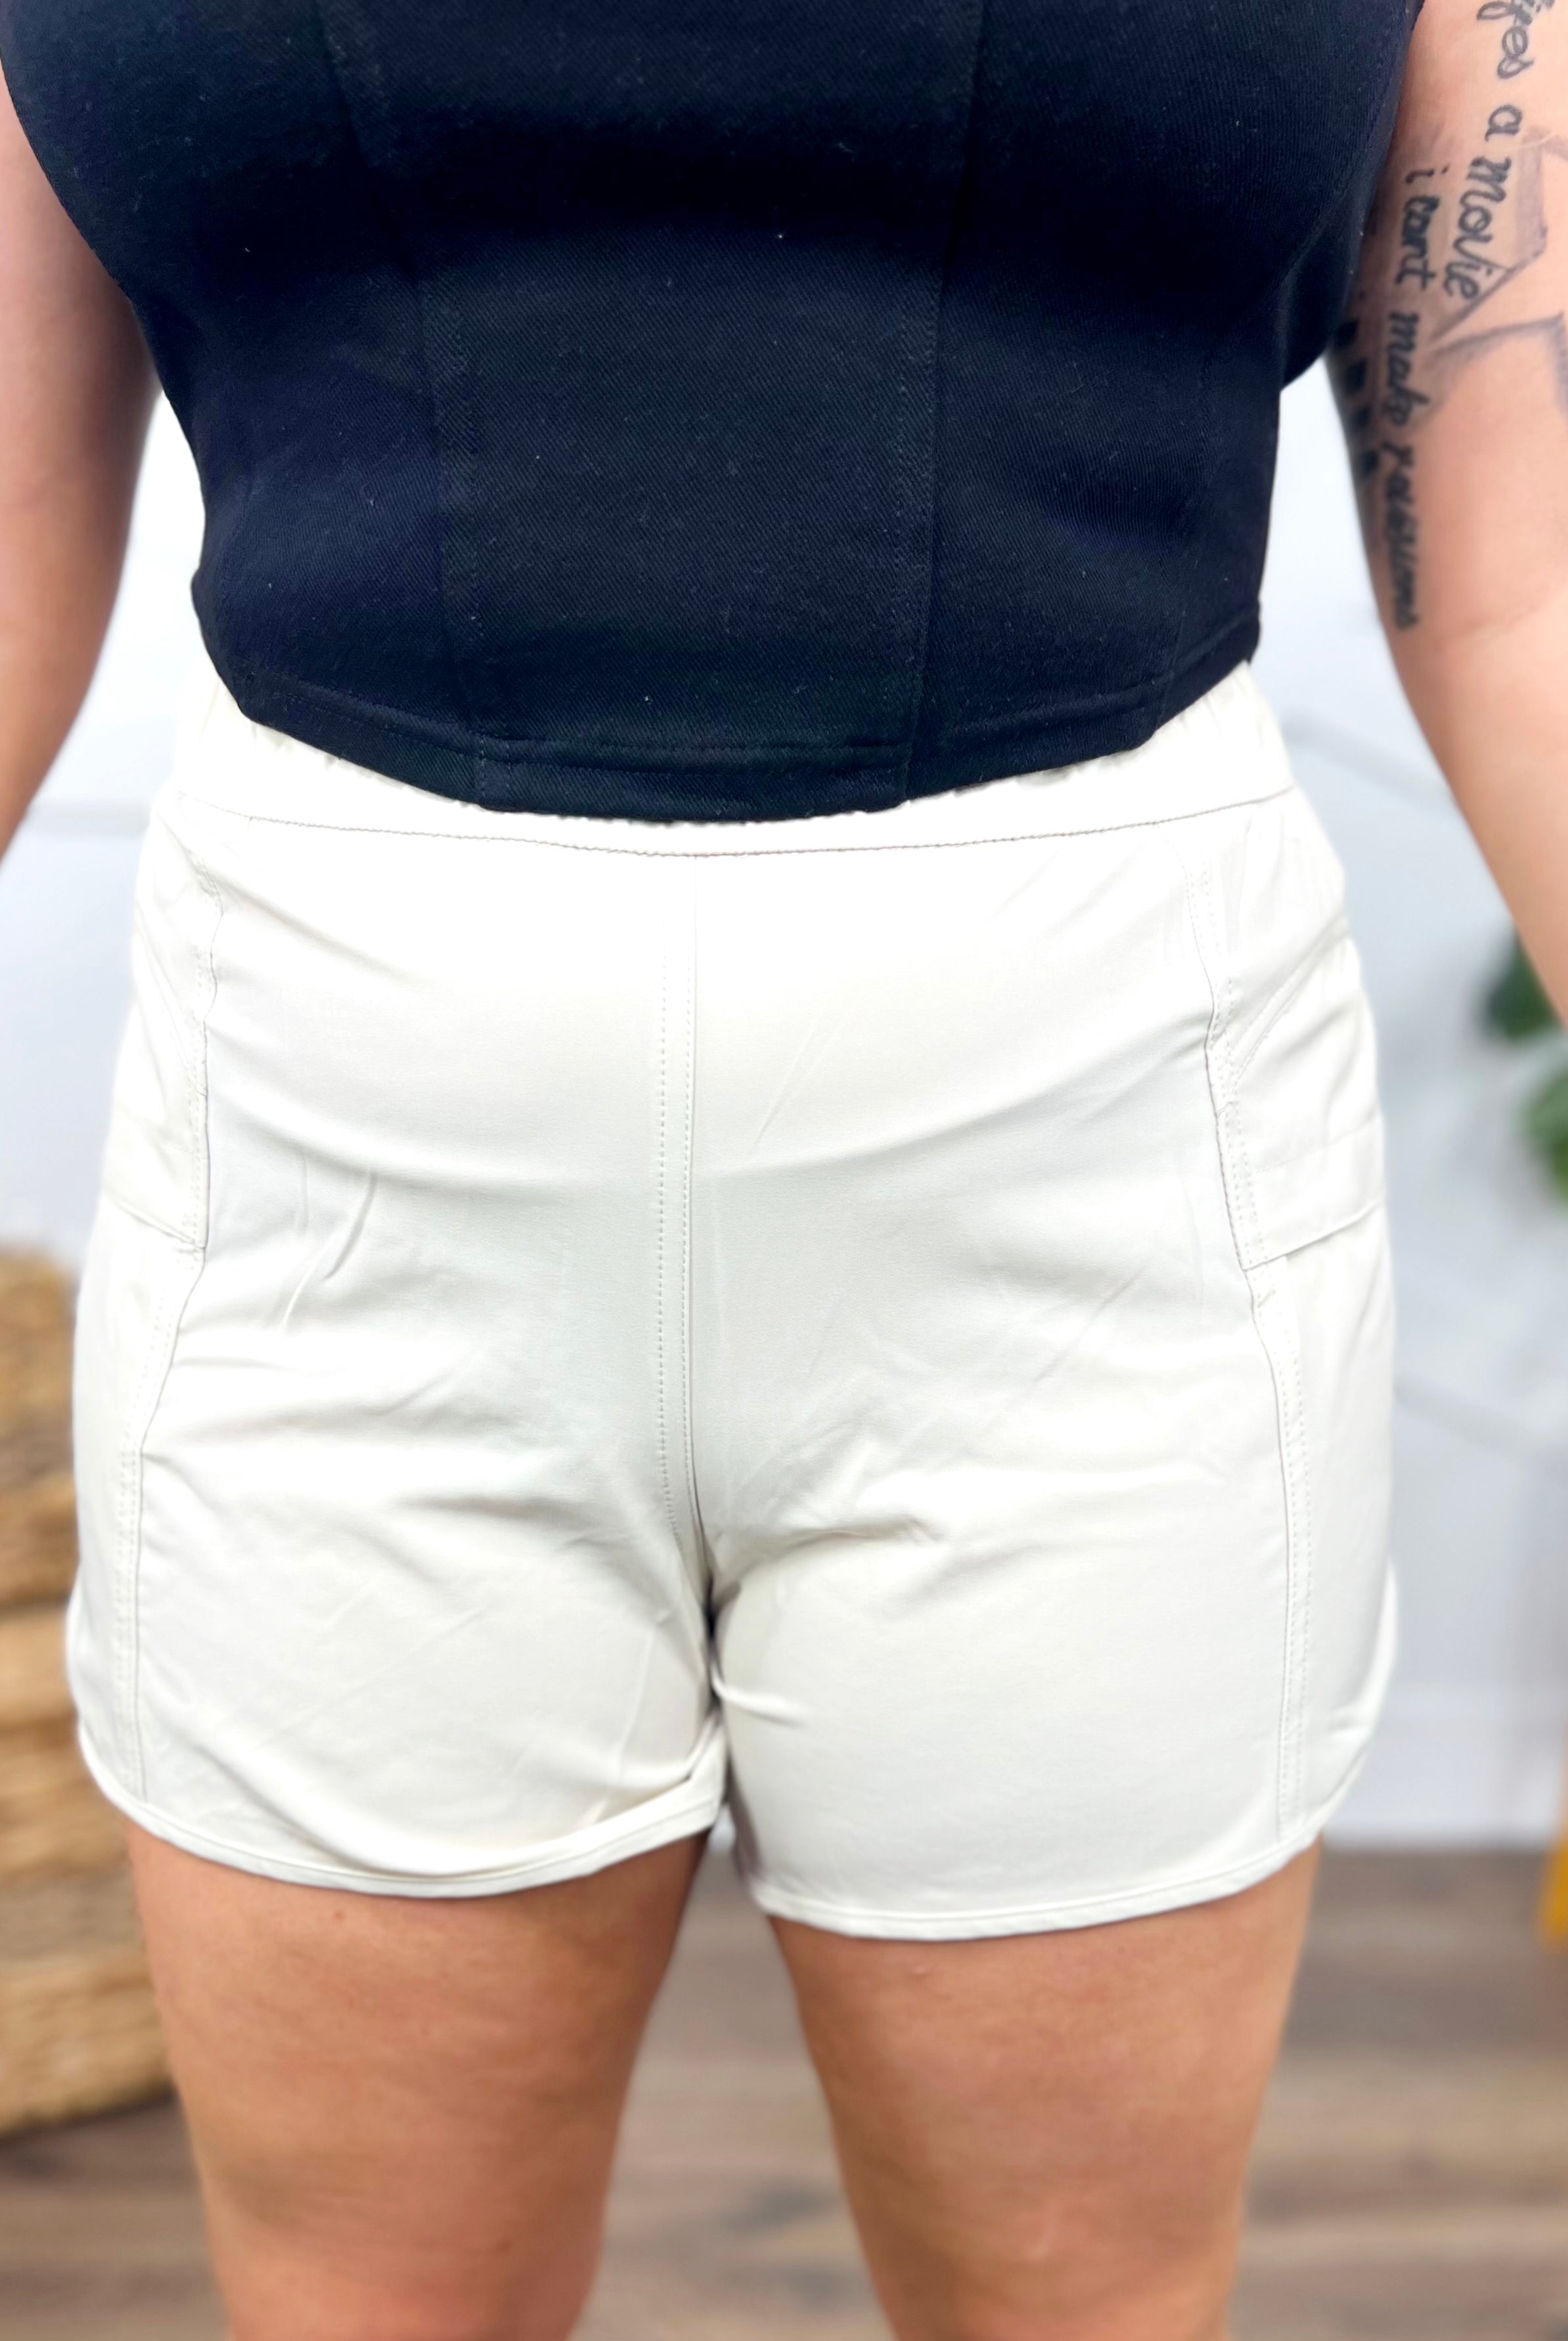 Lunar Hiking Shorts-160 shorts-Rae Mode-Heathered Boho Boutique, Women's Fashion and Accessories in Palmetto, FL